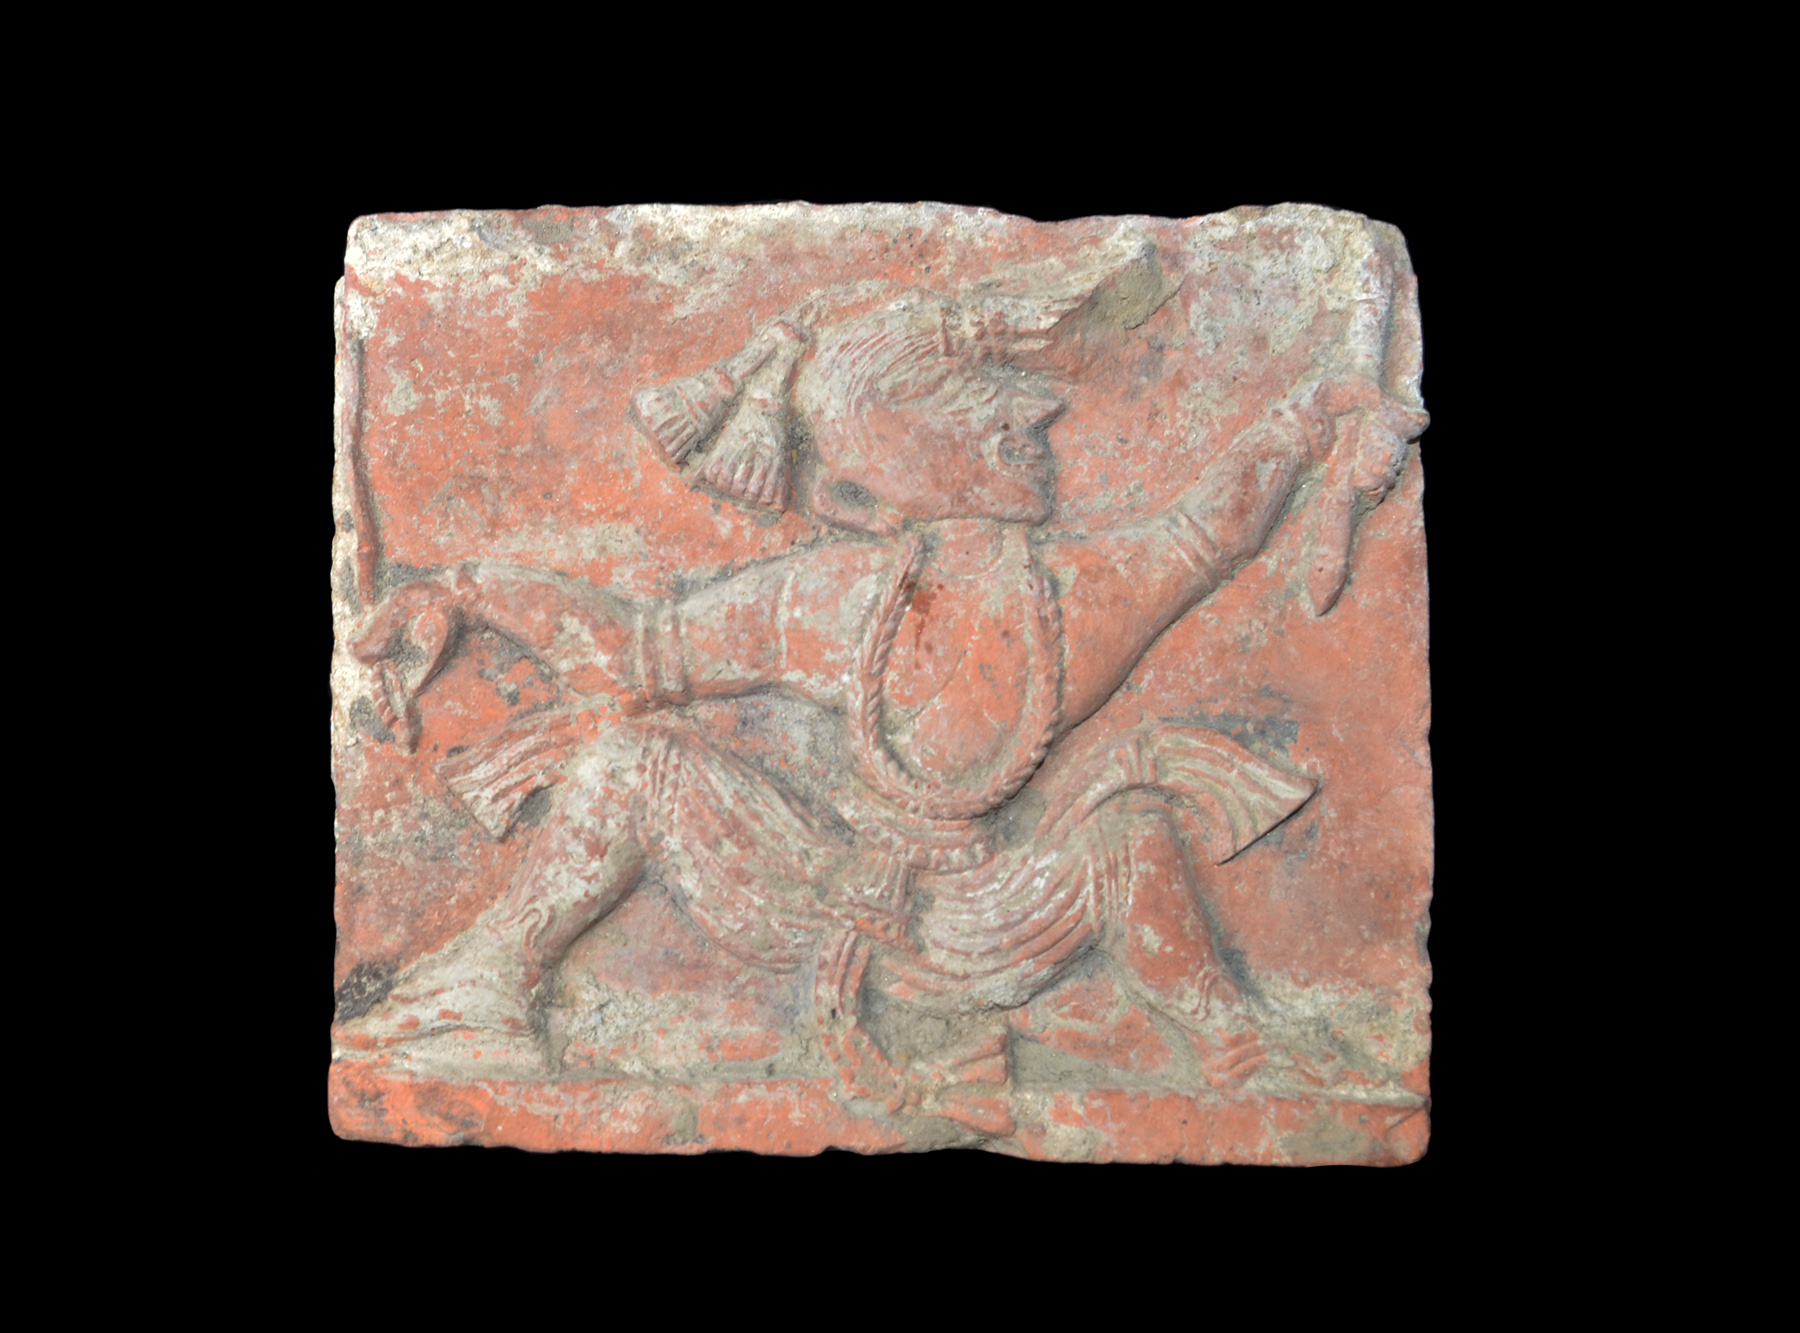 Clay Votive Temple Tile Bengal Province India 6th-10th Century